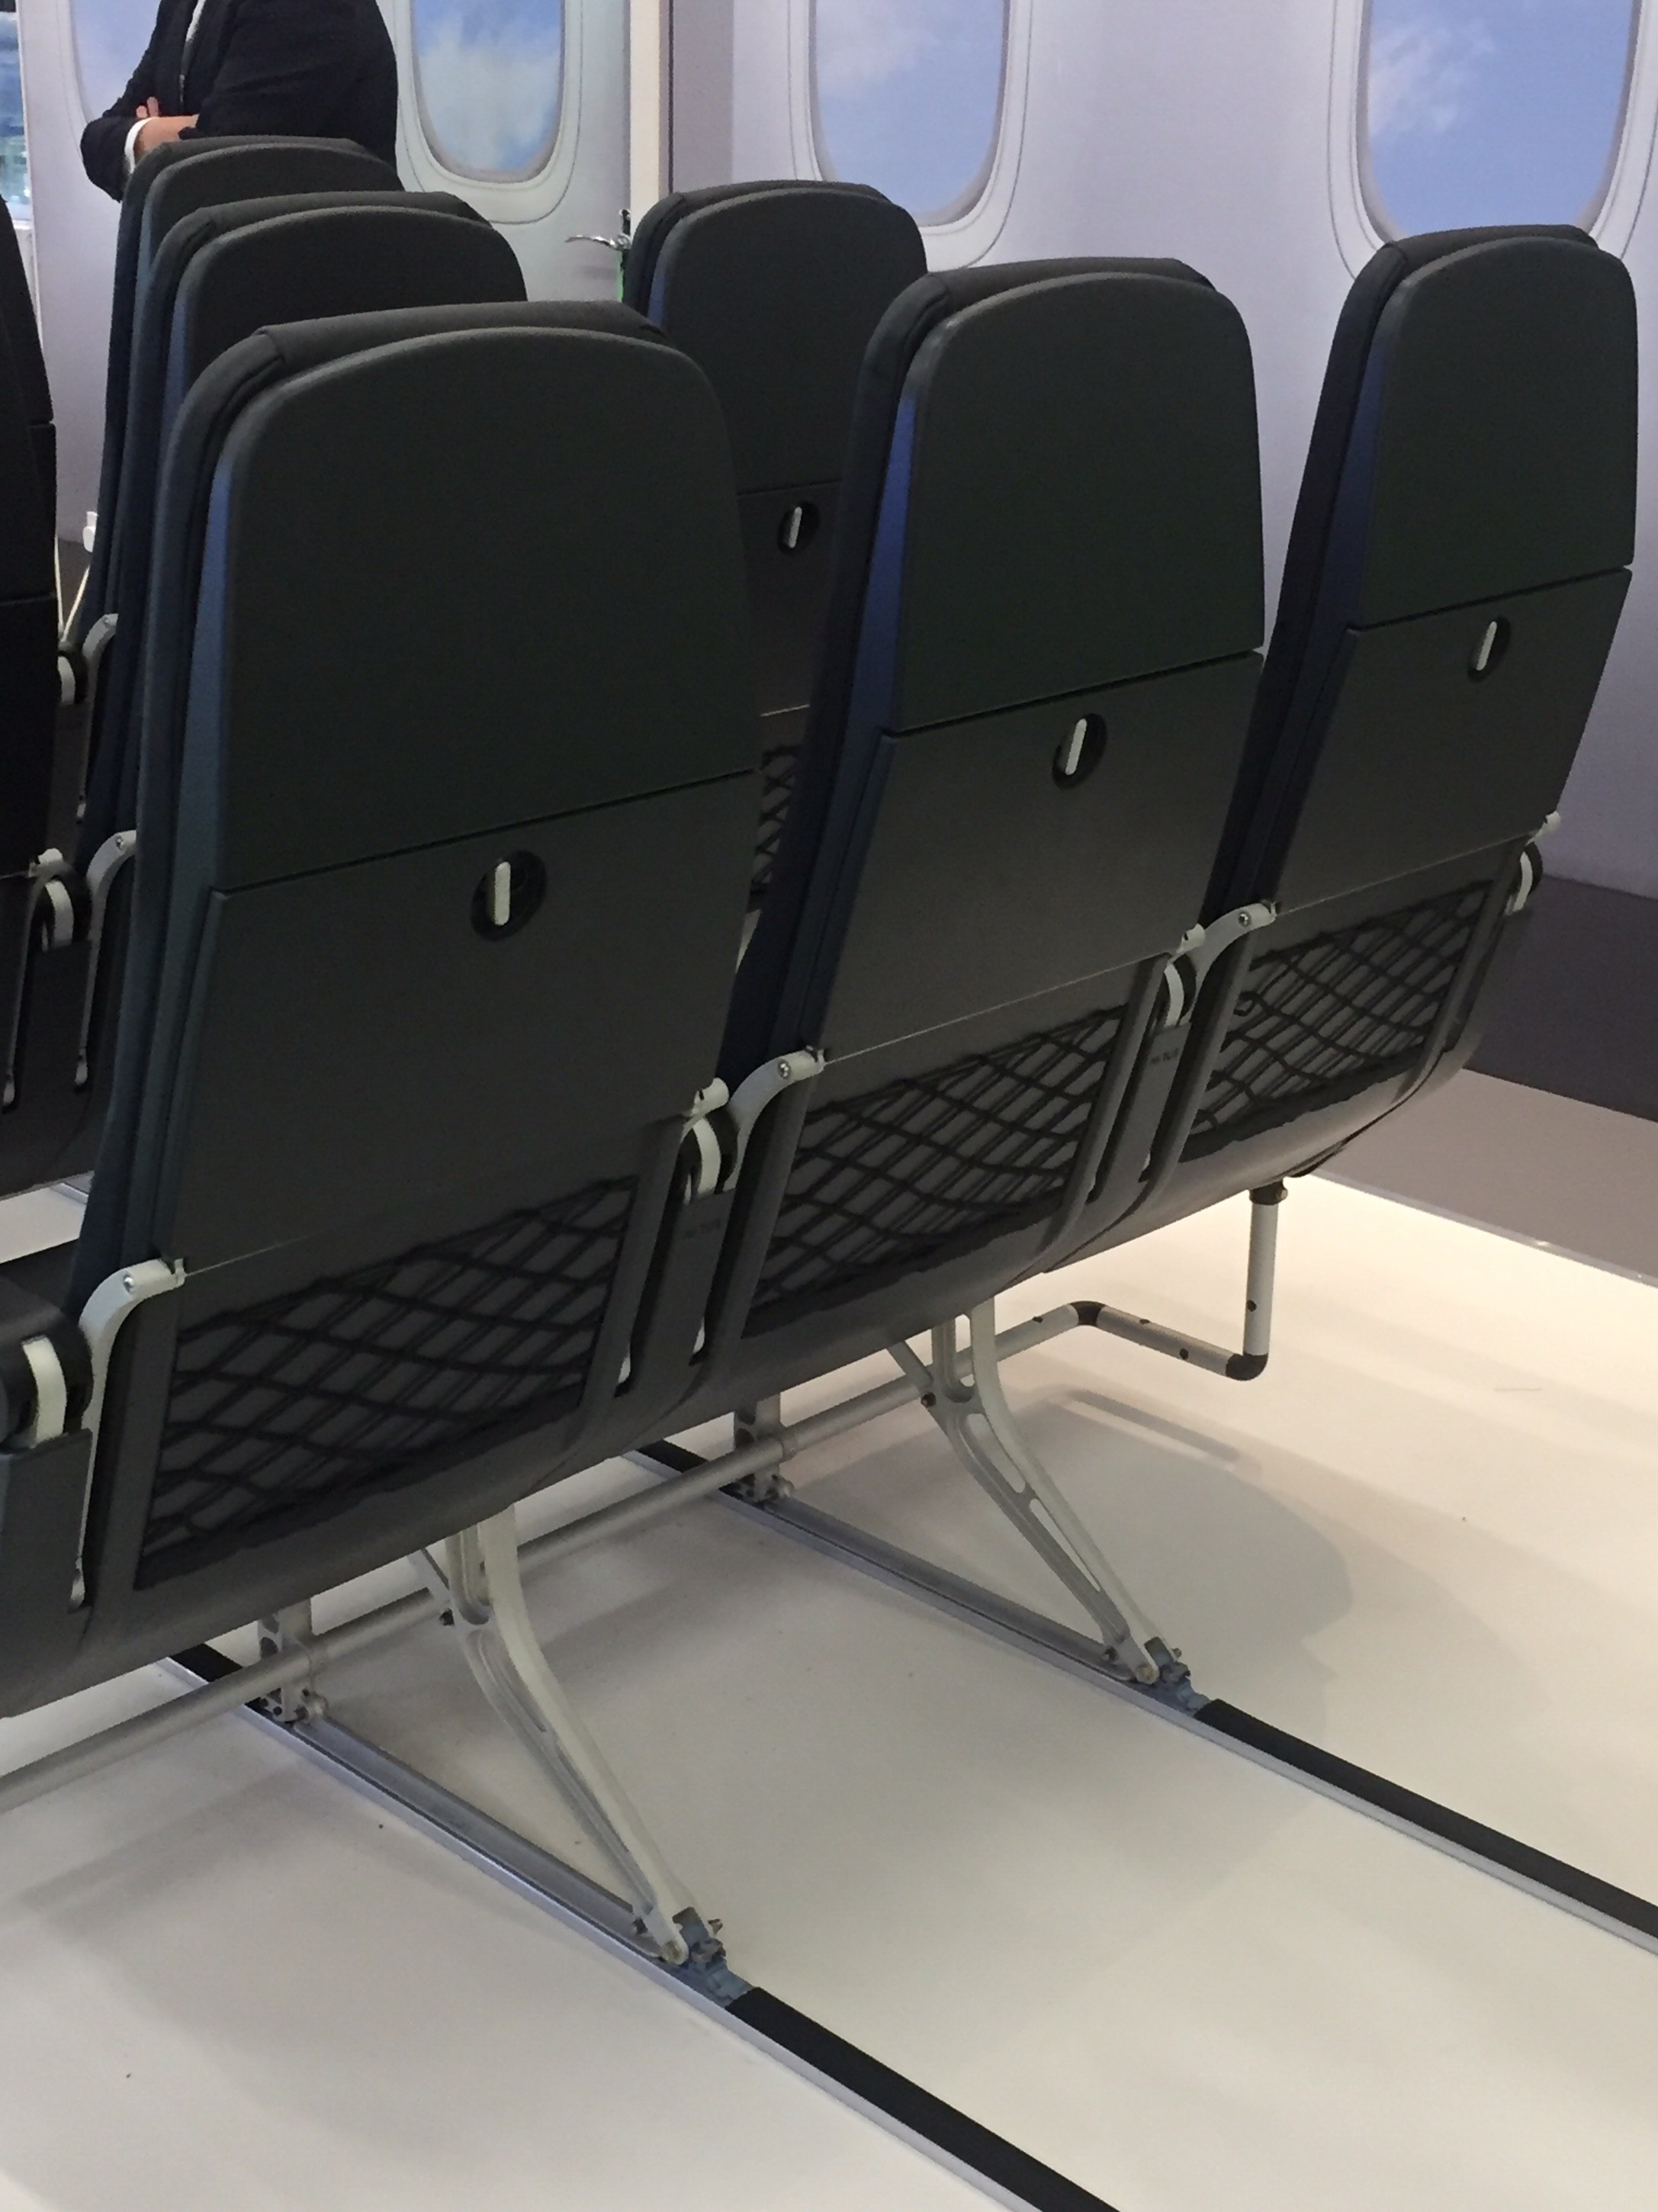 Air Asia chooses new slimline seats from Mirus Aircraft Seating Economy Class & Beyond